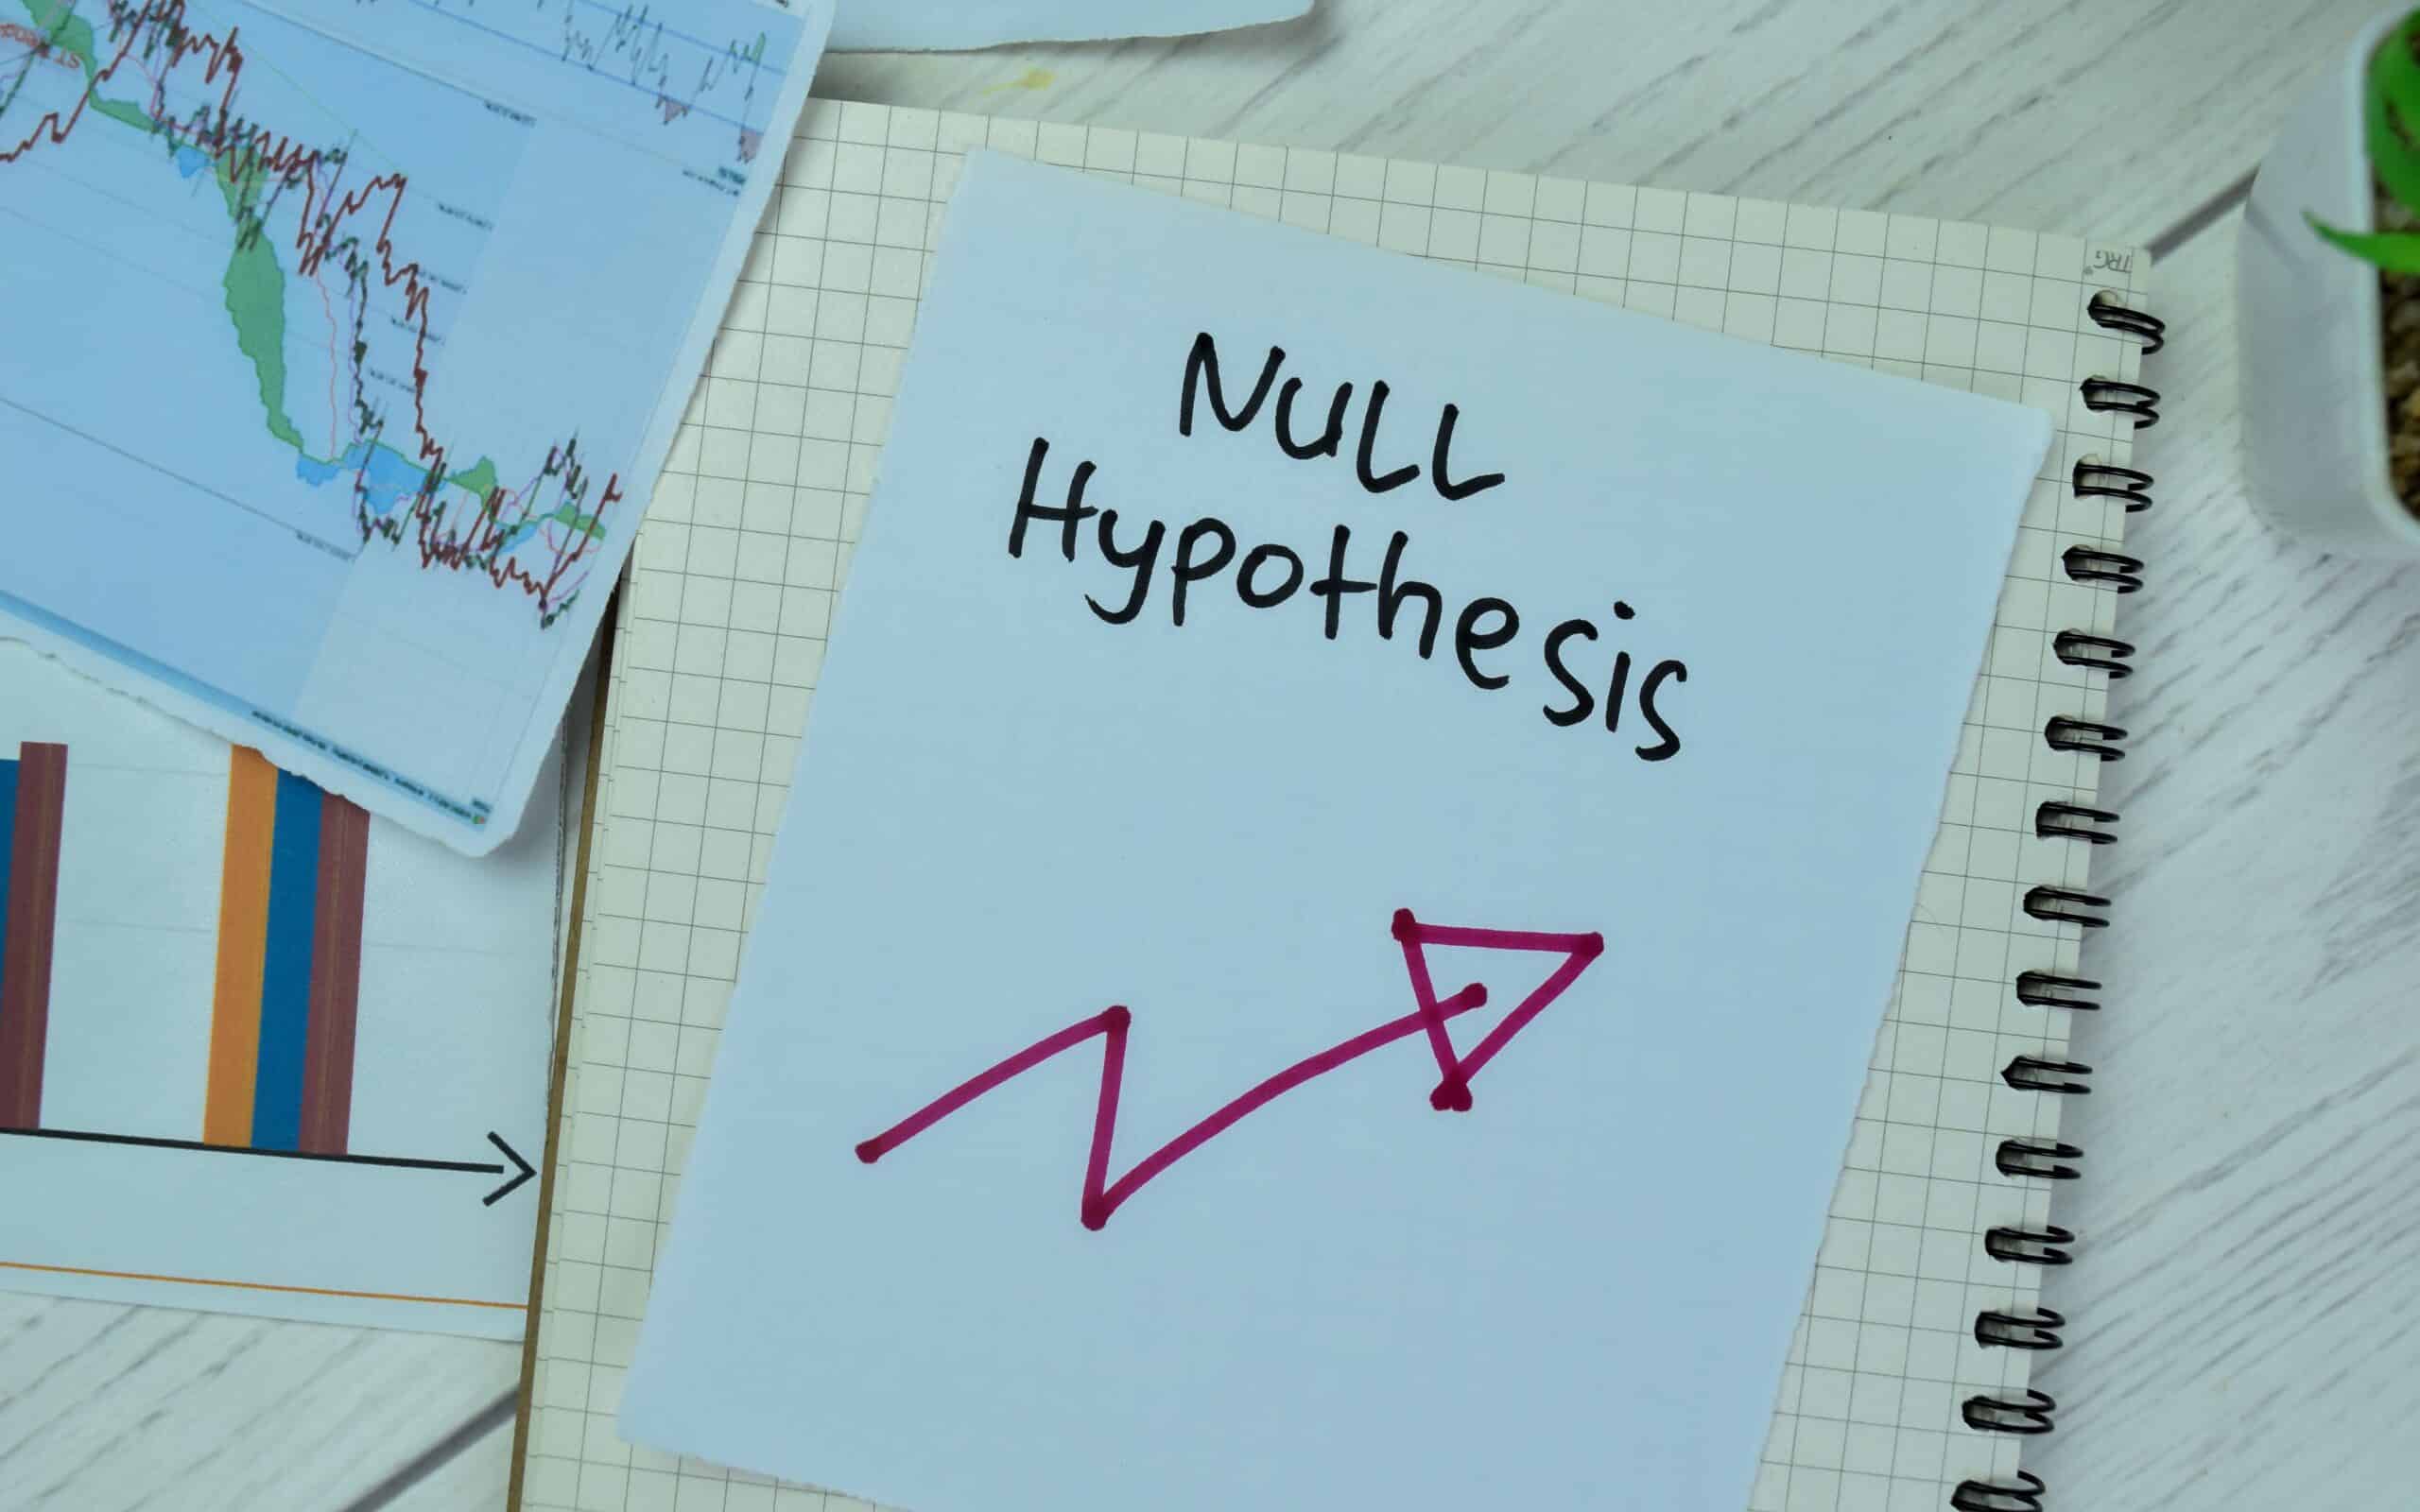 what does null hypothesis mean